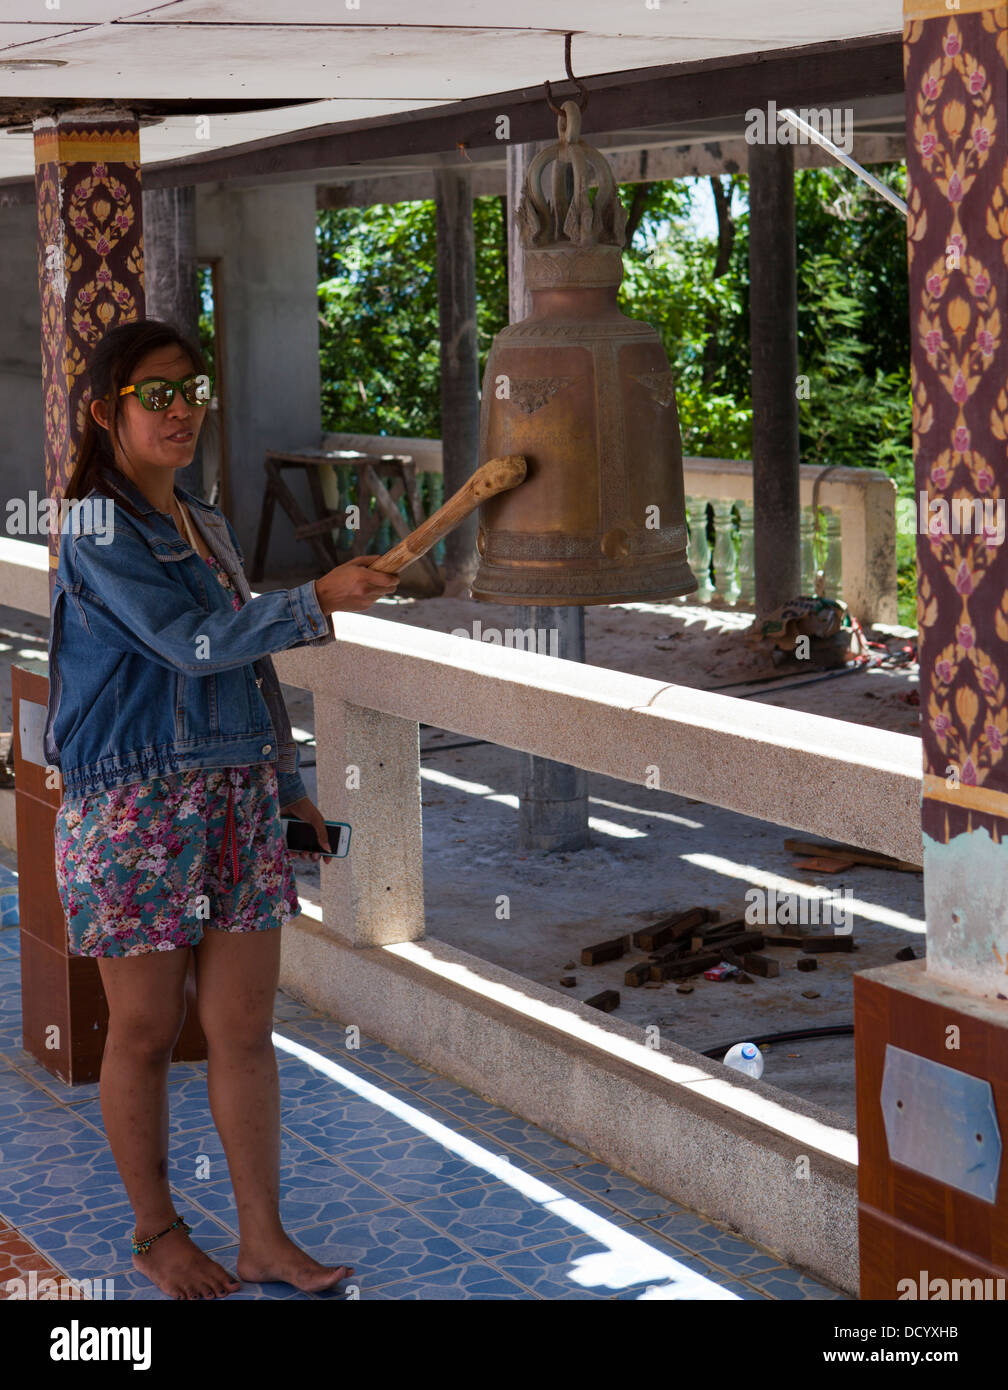 A woman rings a bell at Wat Phra Yai, Temple of the Big Buddha on Ko Samui Island in the Gulf of Thailand. Stock Photo